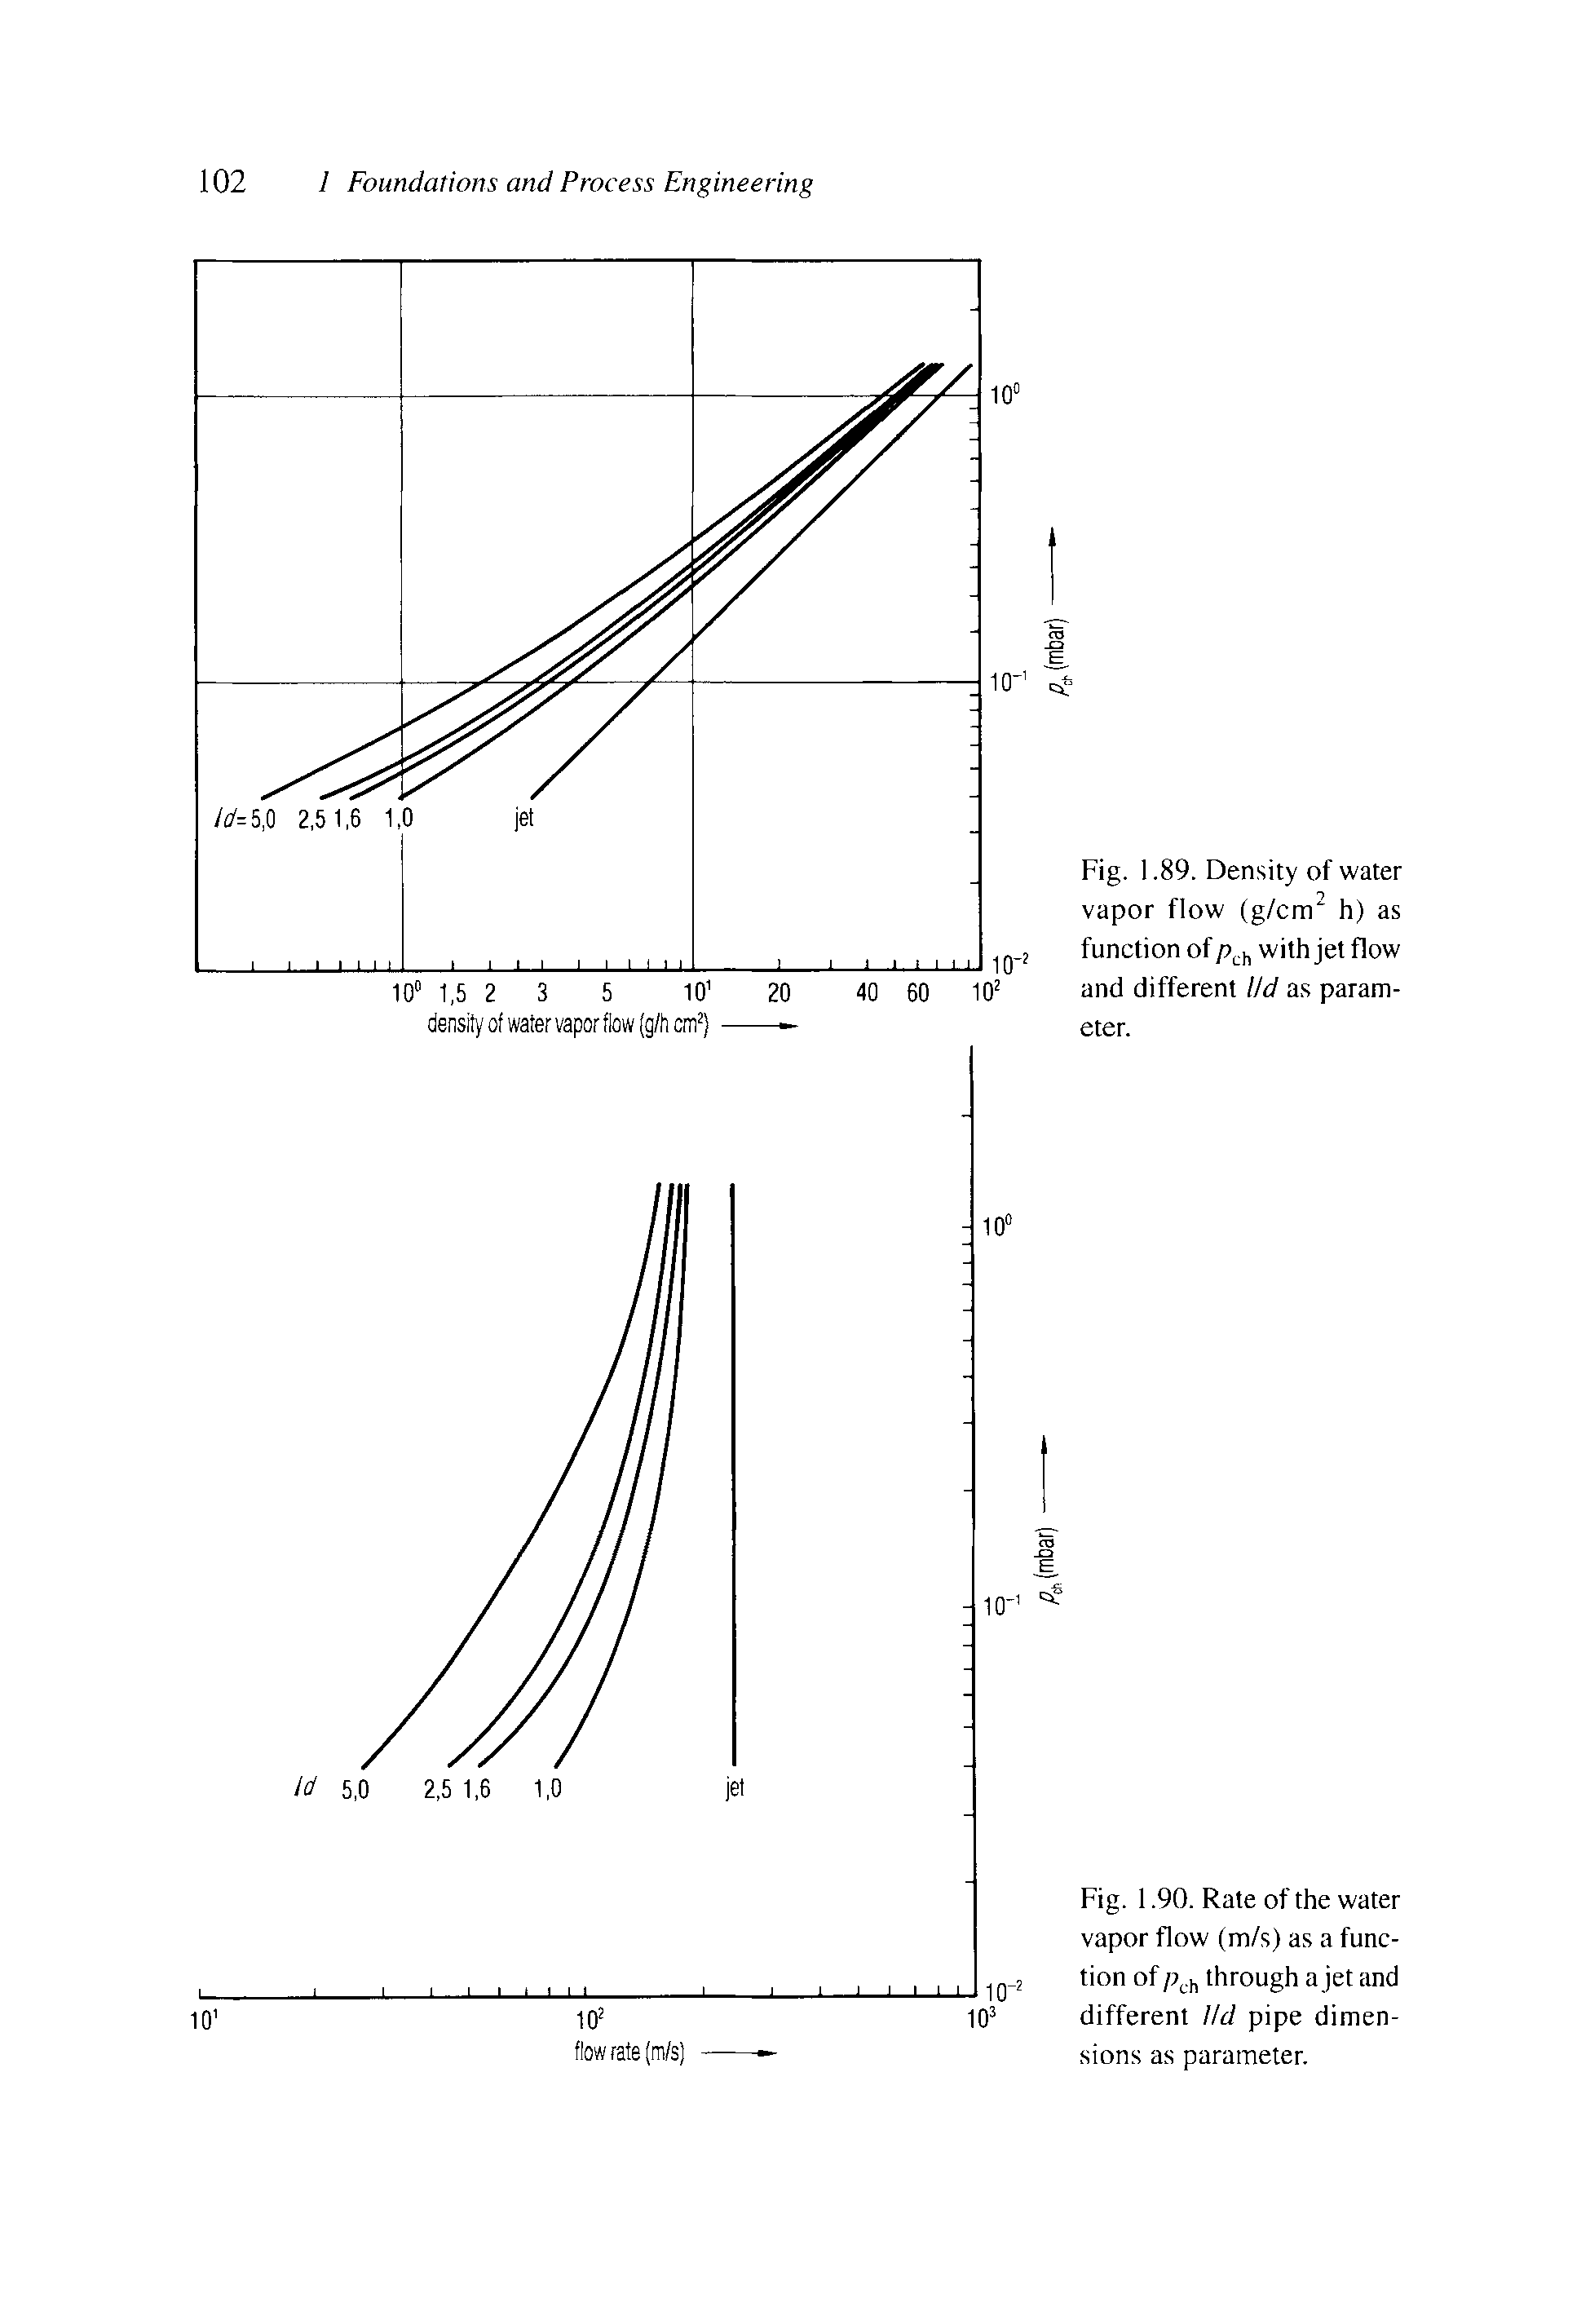 Fig. 1.89. Density of water vapor flow (g/cm h) as function of pch with jet flow and different Hd as parameter.